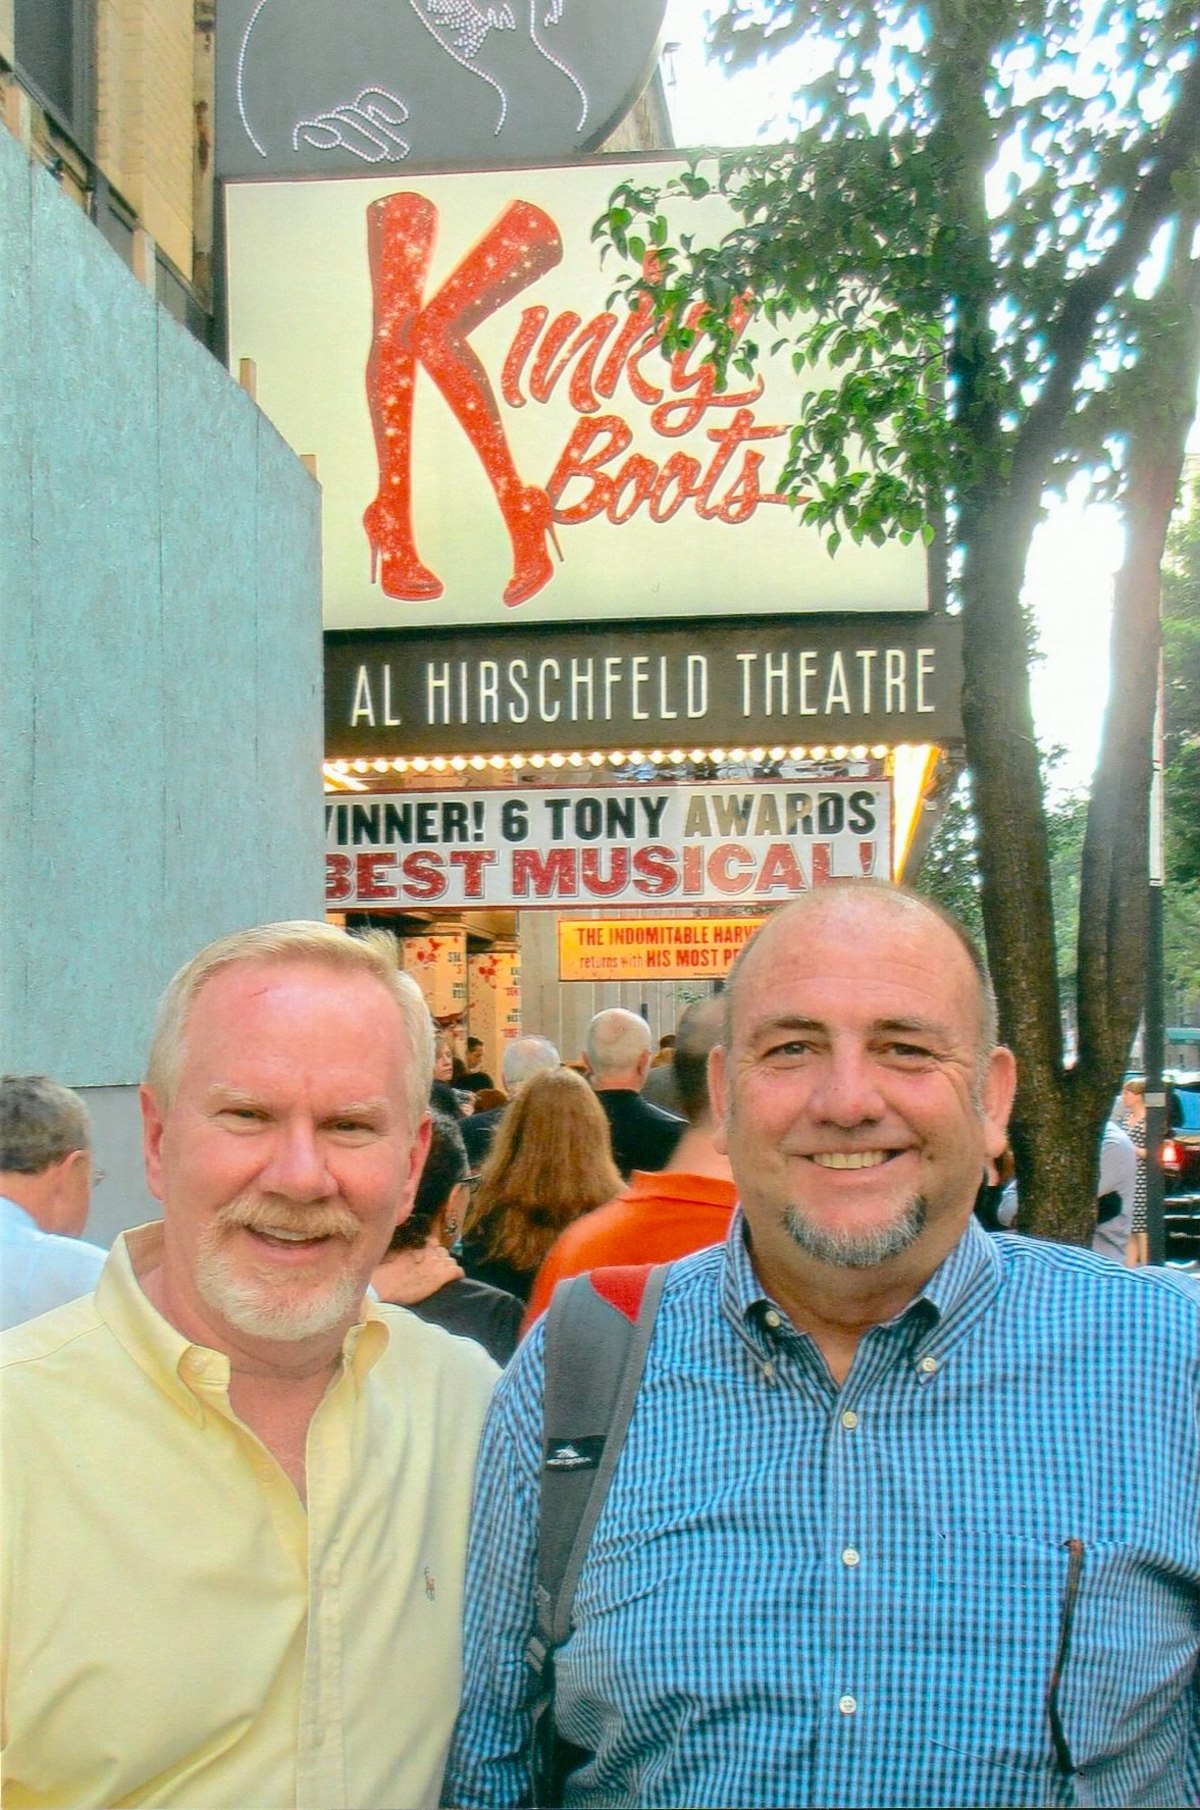 Tom Dyer and John Tanner in front of the Kinky Boots Broadway sign, 2013, New York City, NY. Tom shares, “Many talented Watermark contributors eventually relocated to New York City. I began making regular trips and developed a defining love of the city and Broadway theater. My friend, John Tanner, and I saw Kinky Boots in 2013.” Photo courtesy of Tom Dyer.